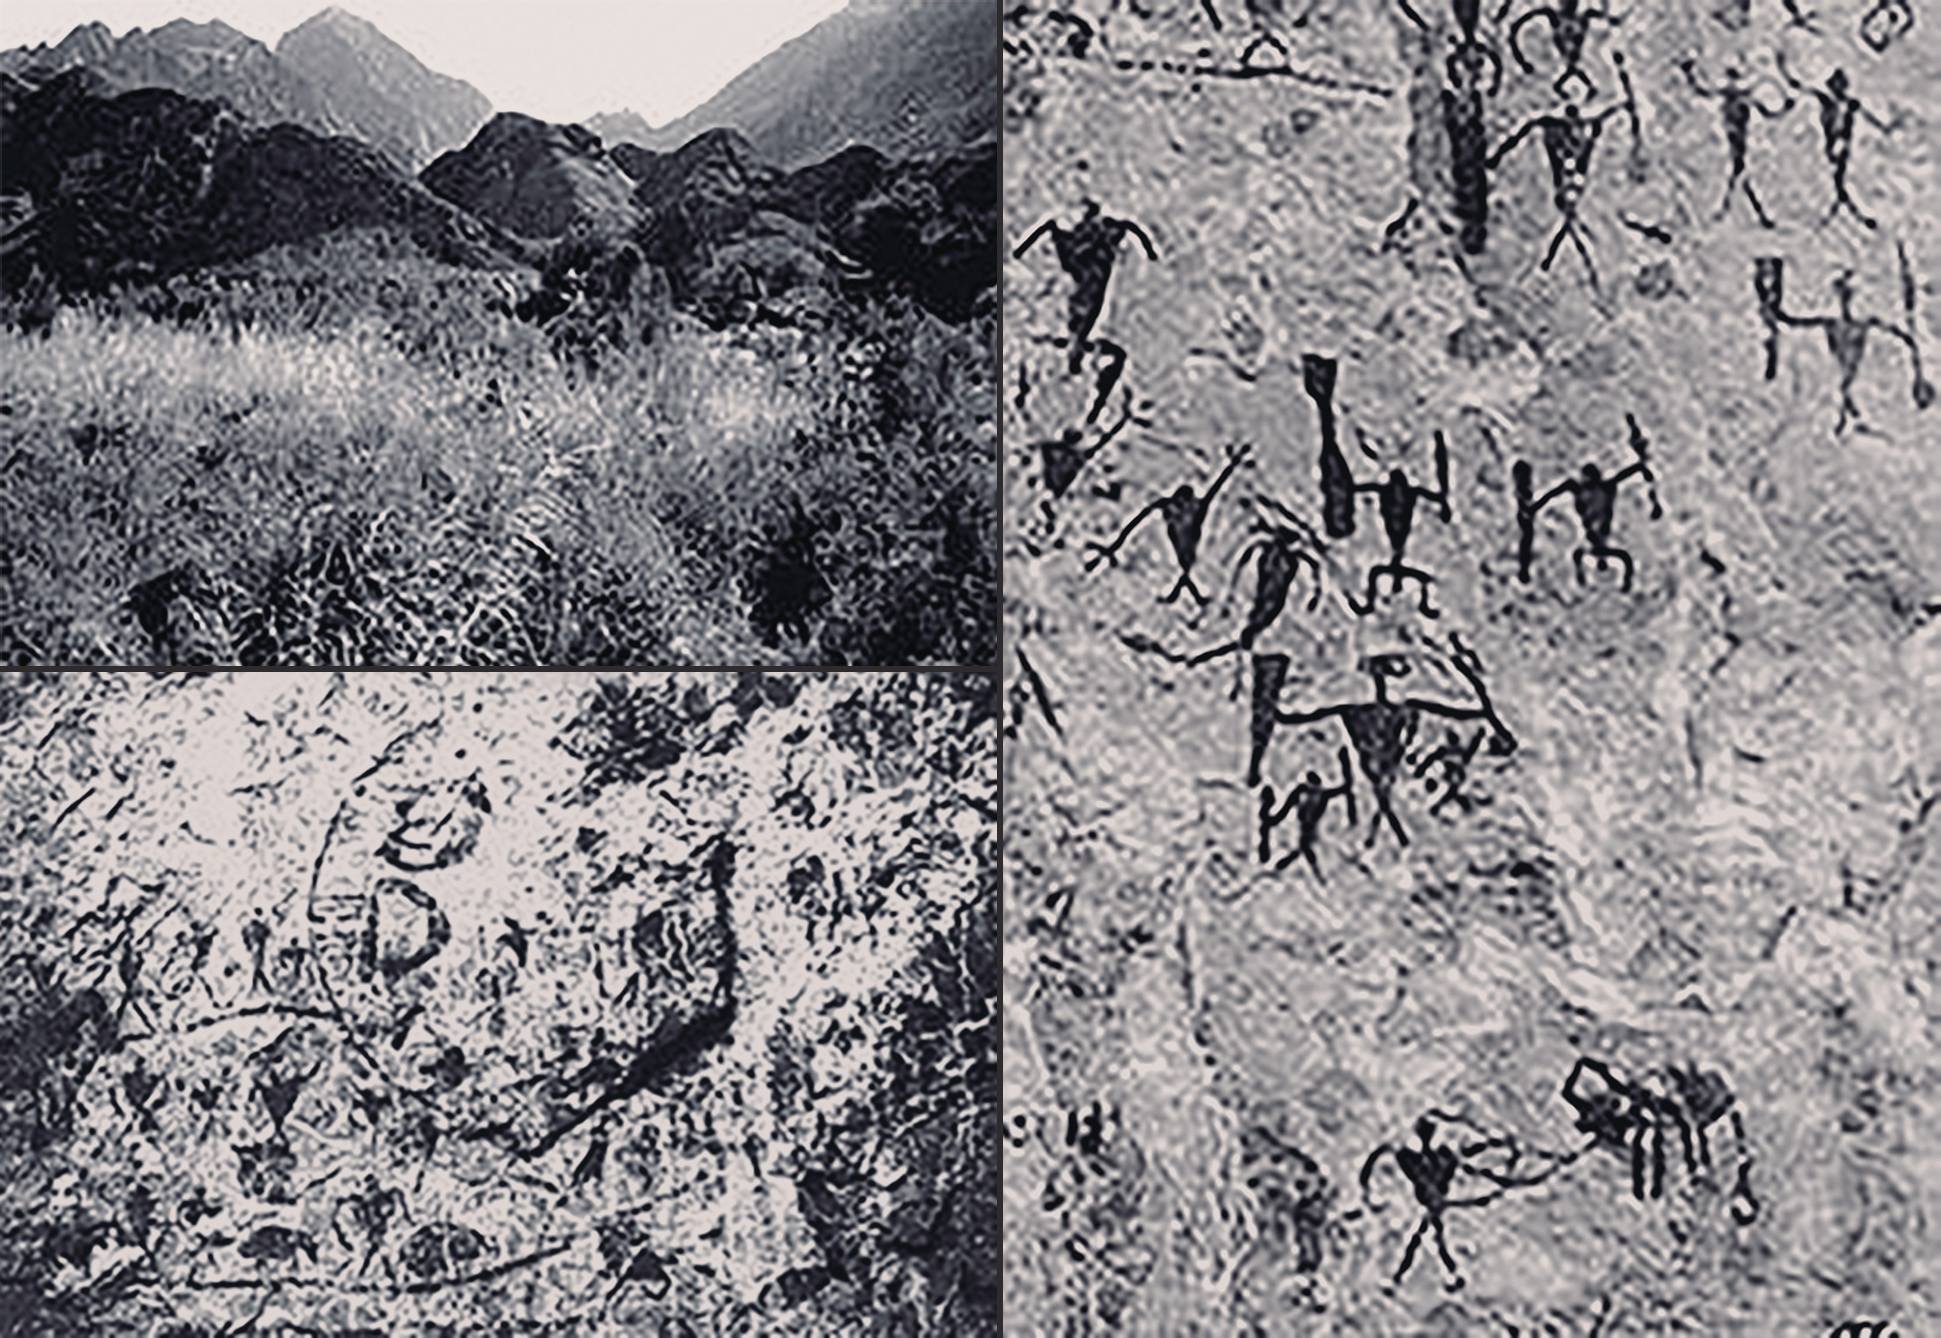 The Mountains of Yunnan Province Painted in red of jugglers and performers holding shields Rock Art No.2 site in Cangyuan county.